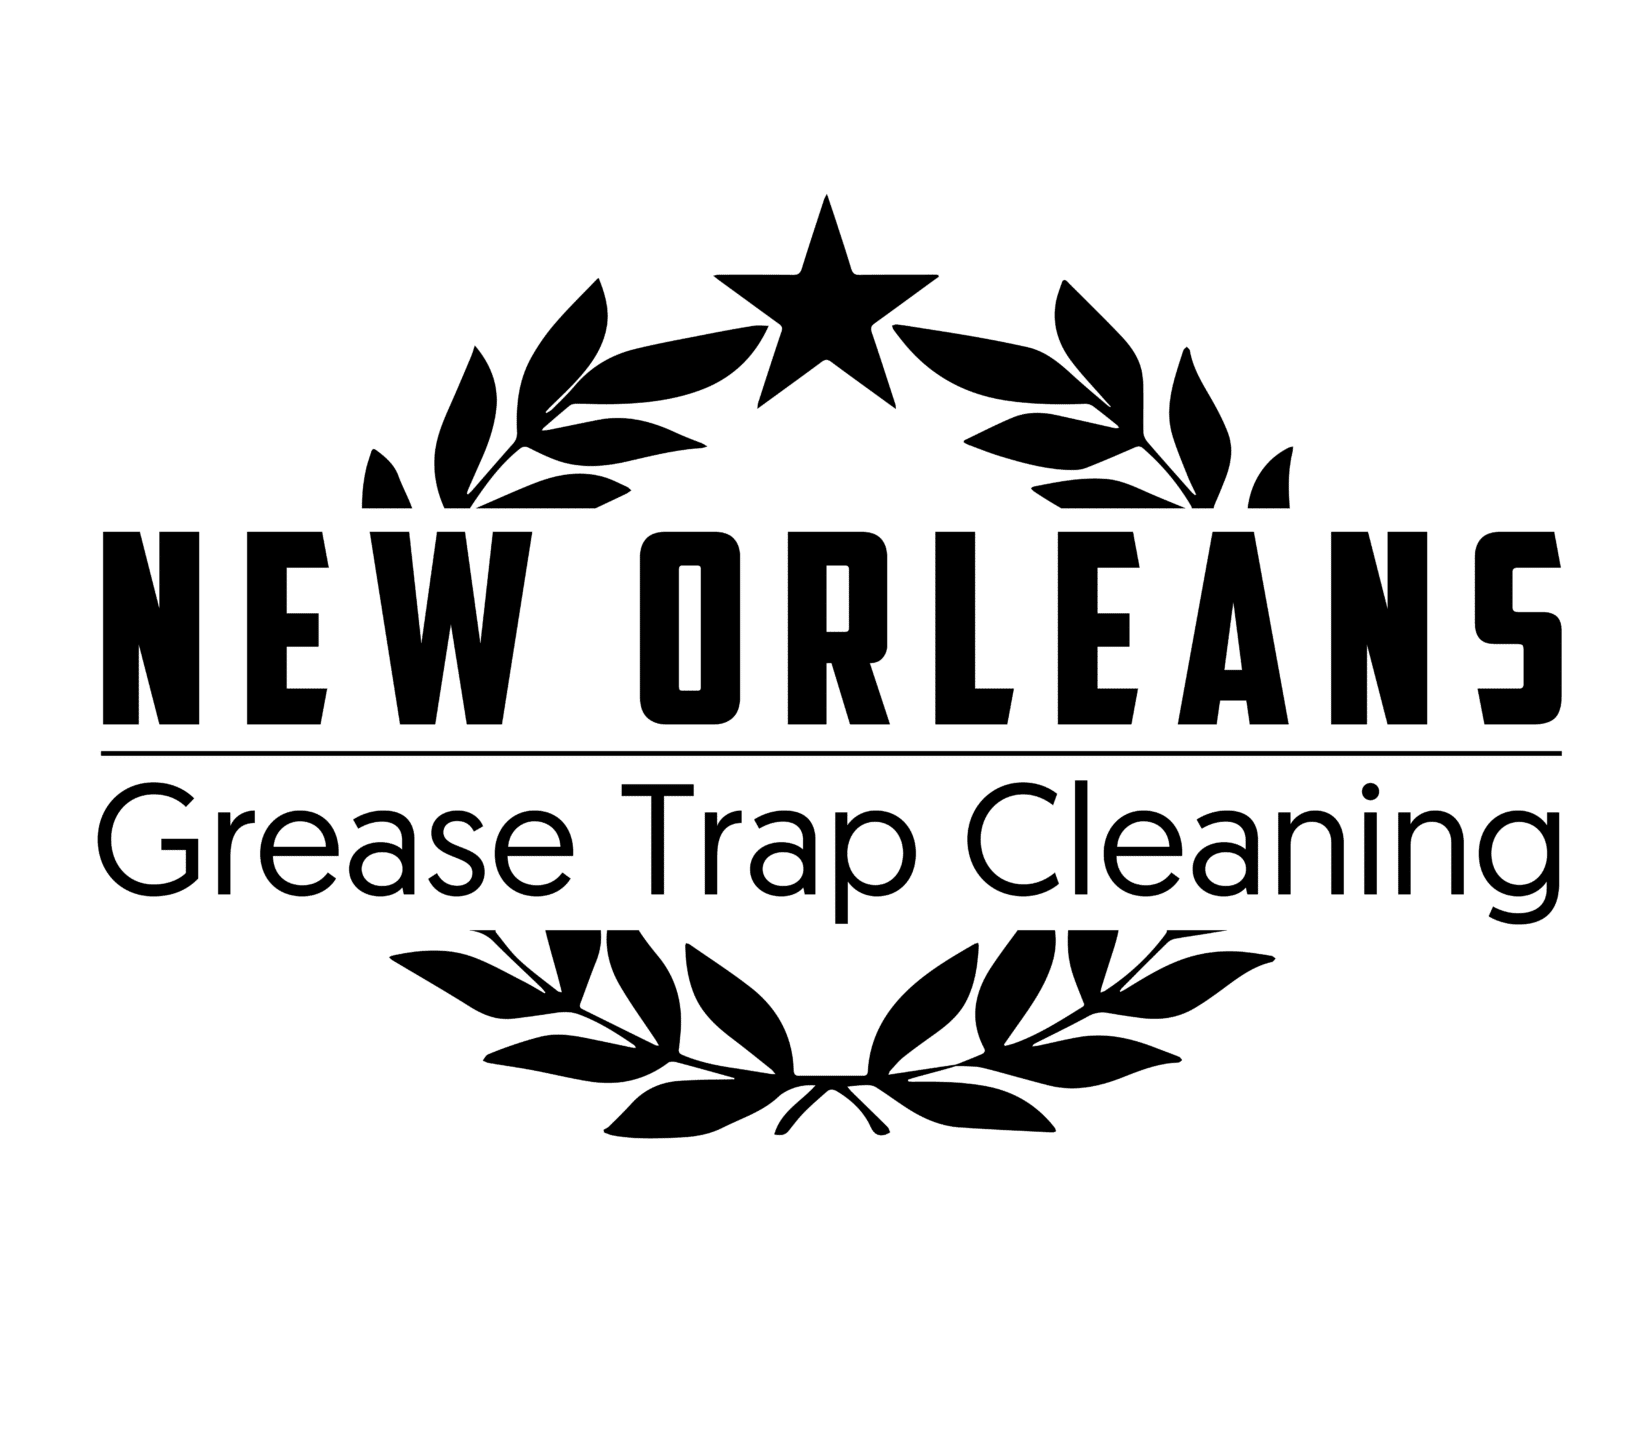 New Orleans Grease Trap Cleaning - Cooking Oil Recycling